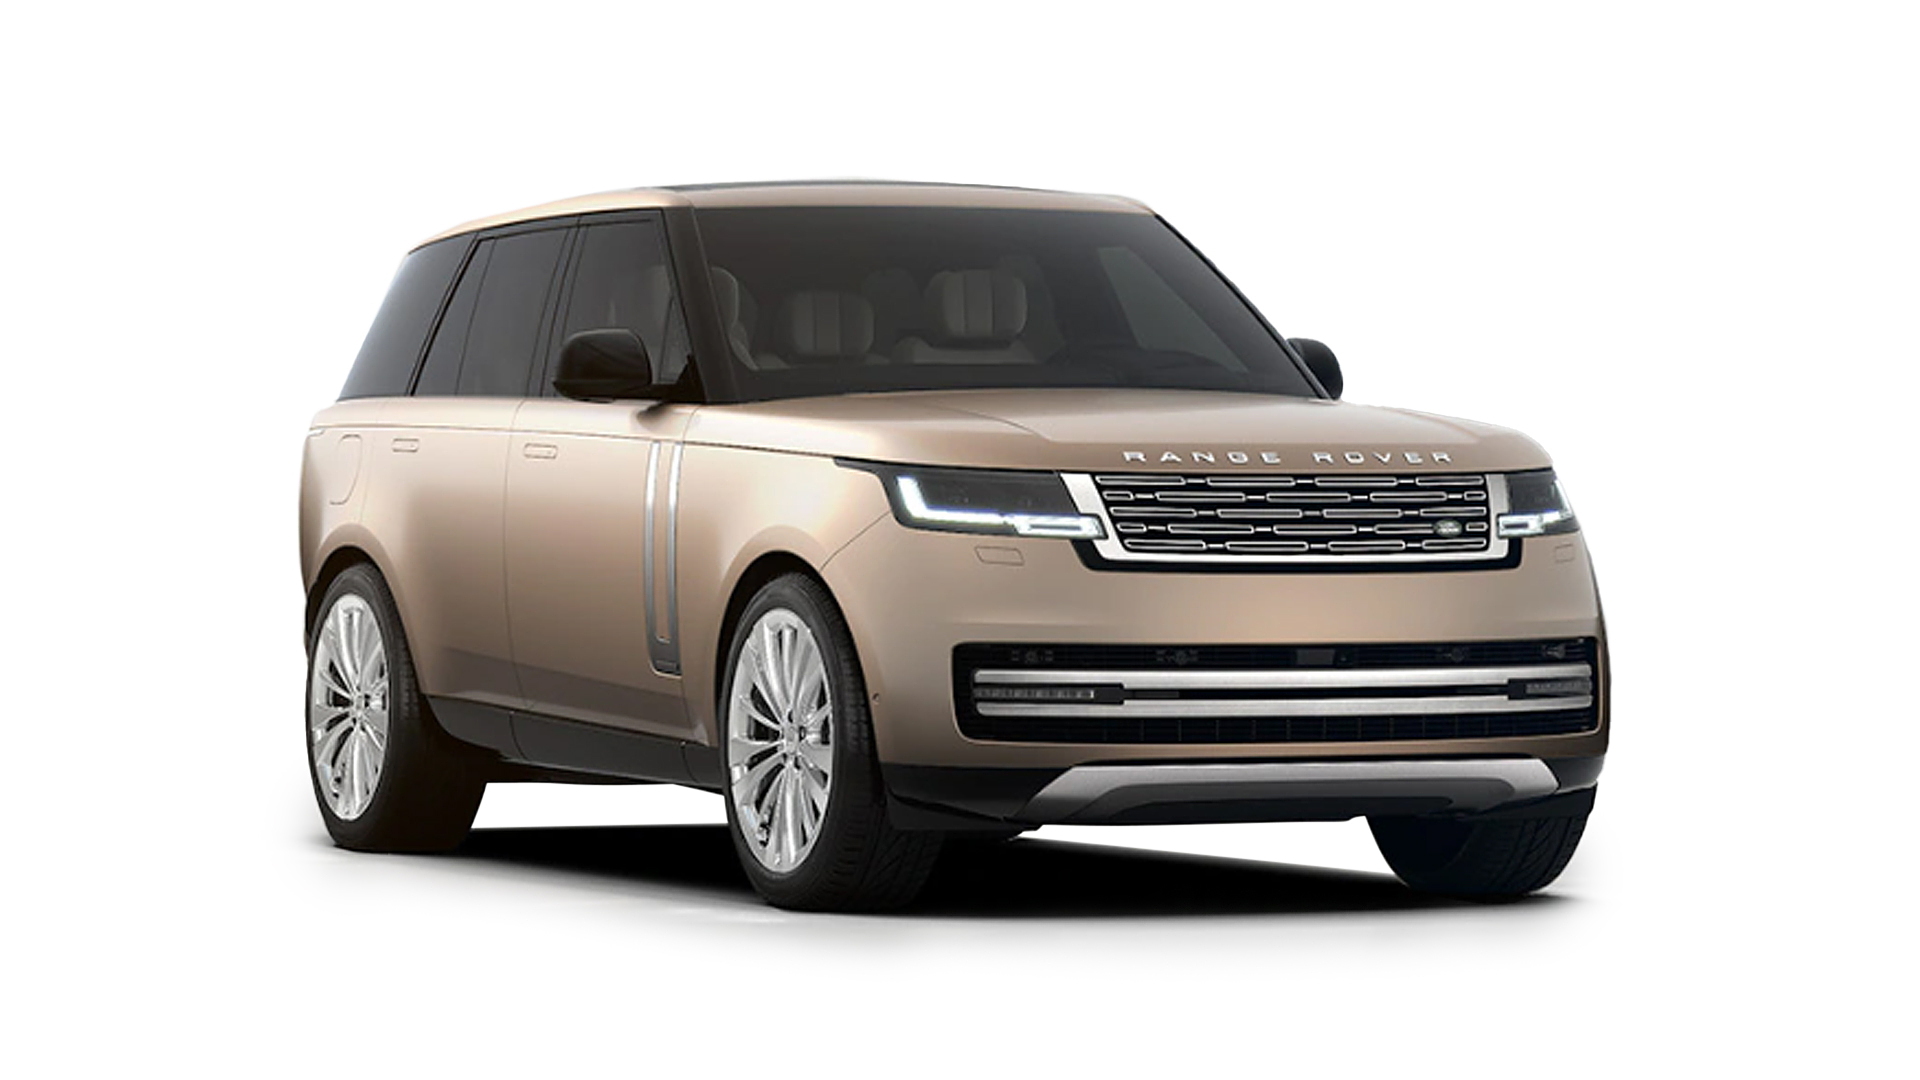 Land Rover Range Rover Images - Interior & Exterior Photo Gallery [150+  Images] - CarWale